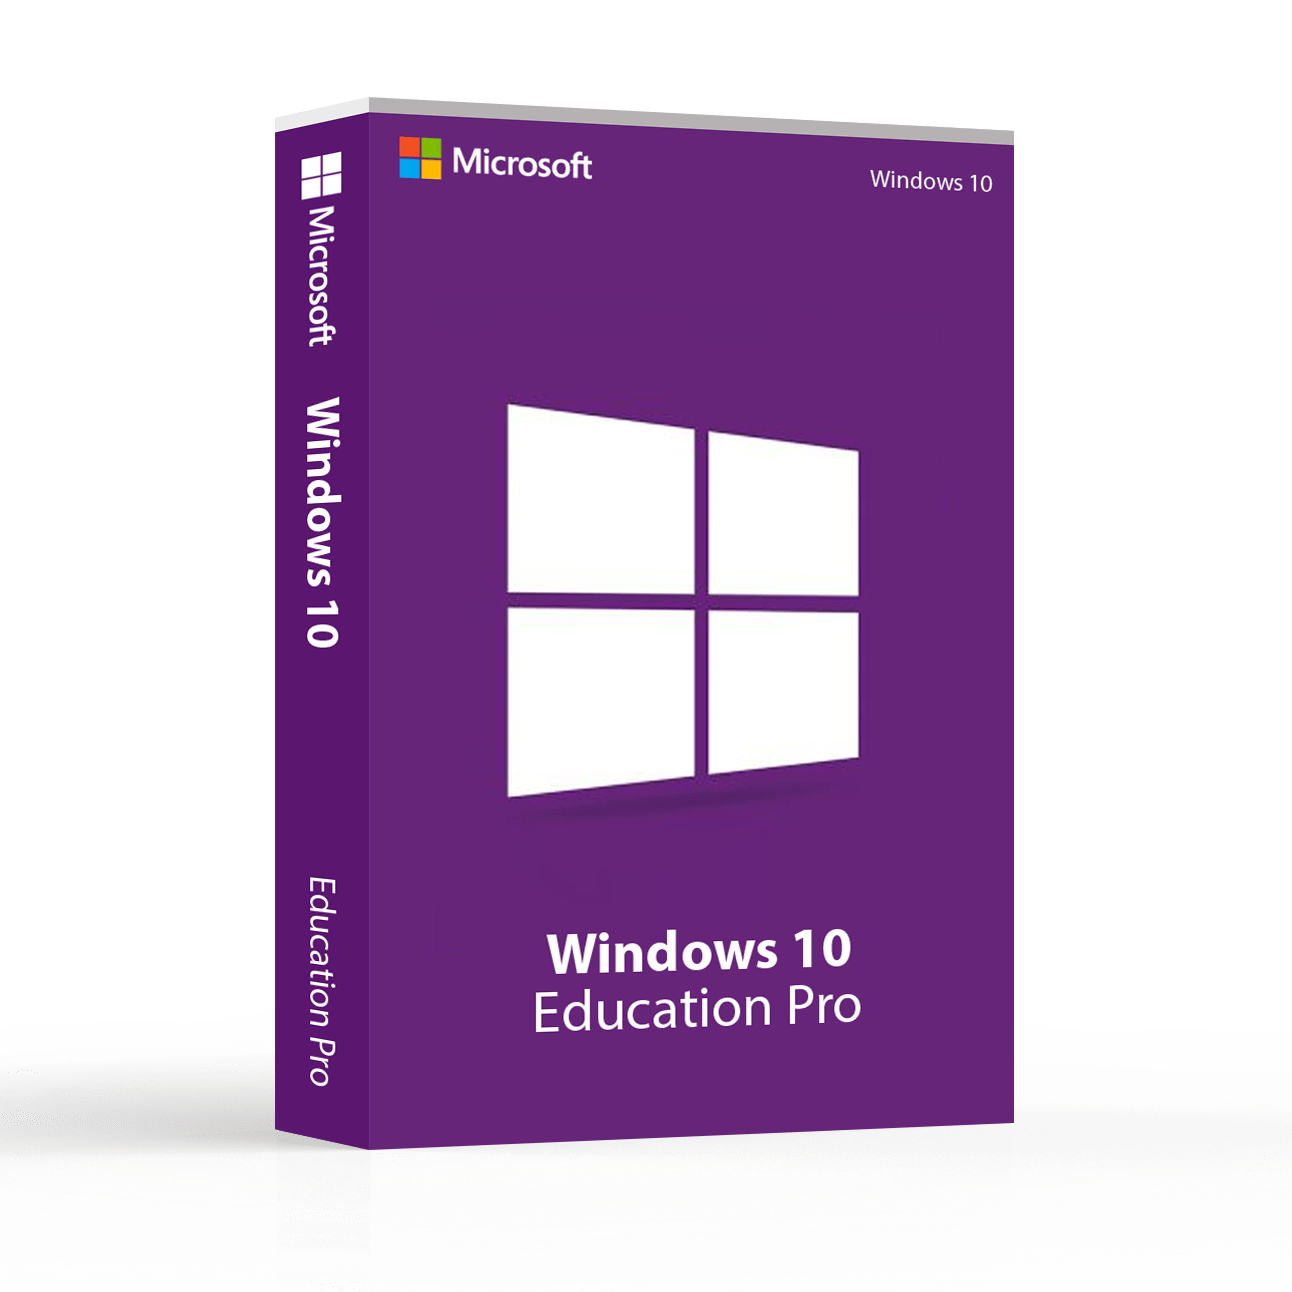 free educational download for windows pro 10